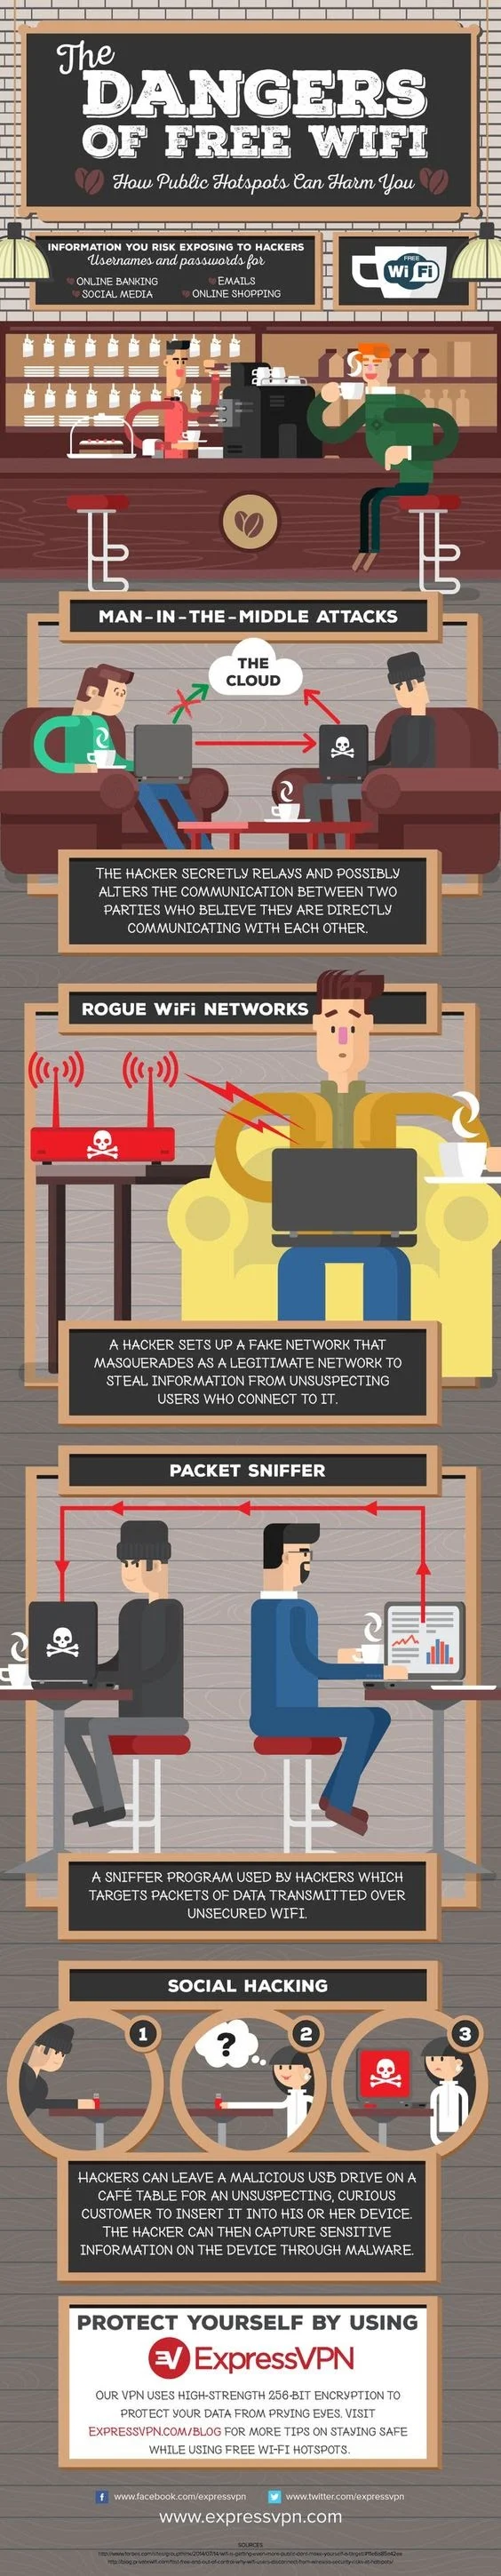 The Dangers of Free Wi-Fi [Infographic]